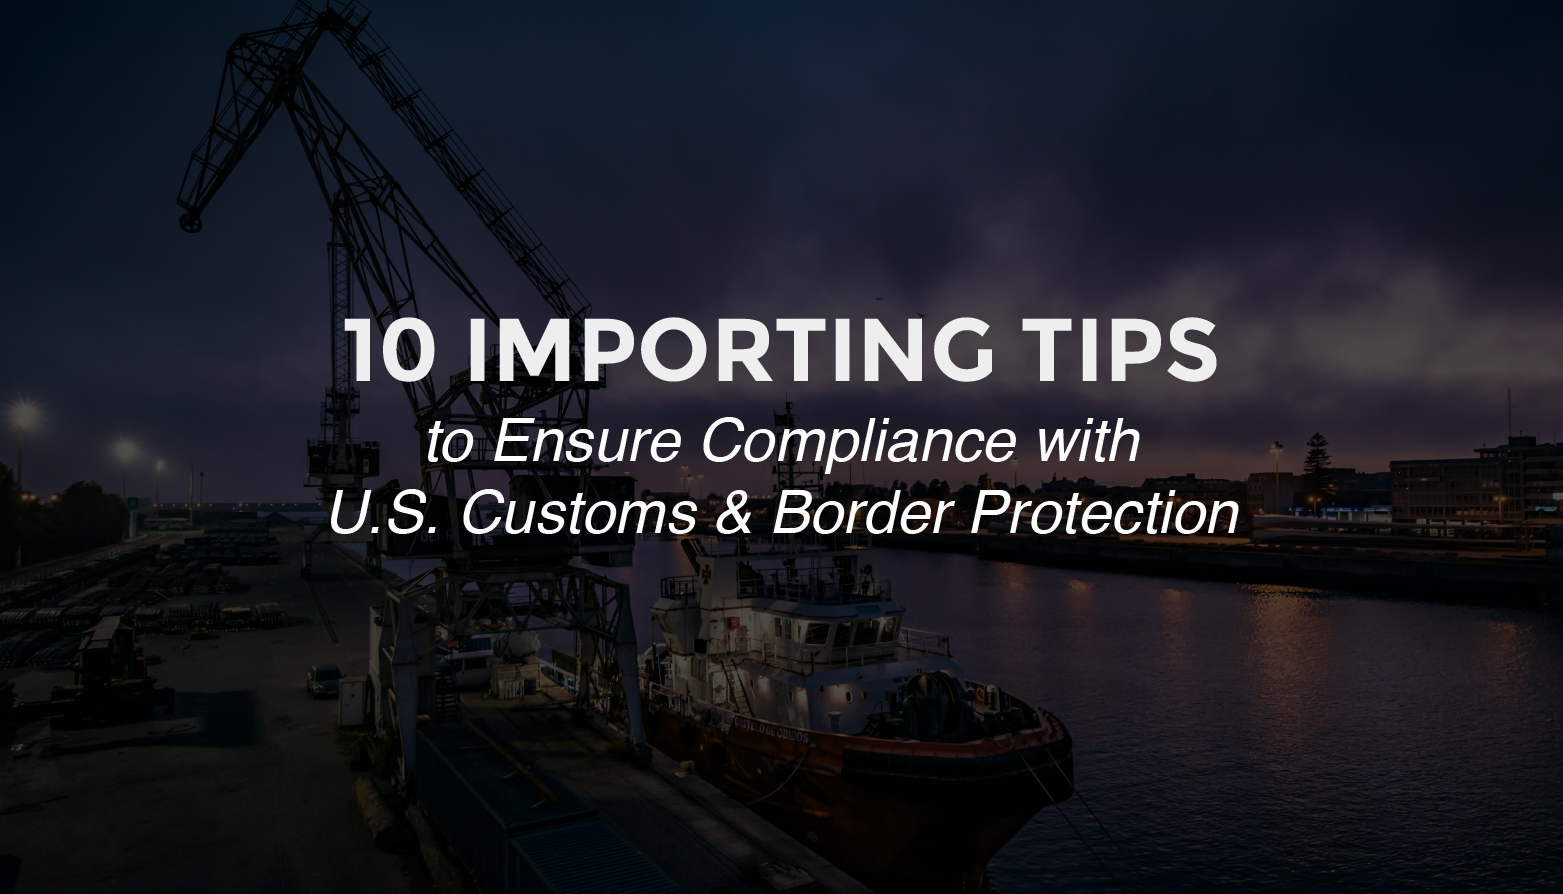 Trade Risk Guaranty provides 10 tips to ensure customs compliance for importing into the United States.